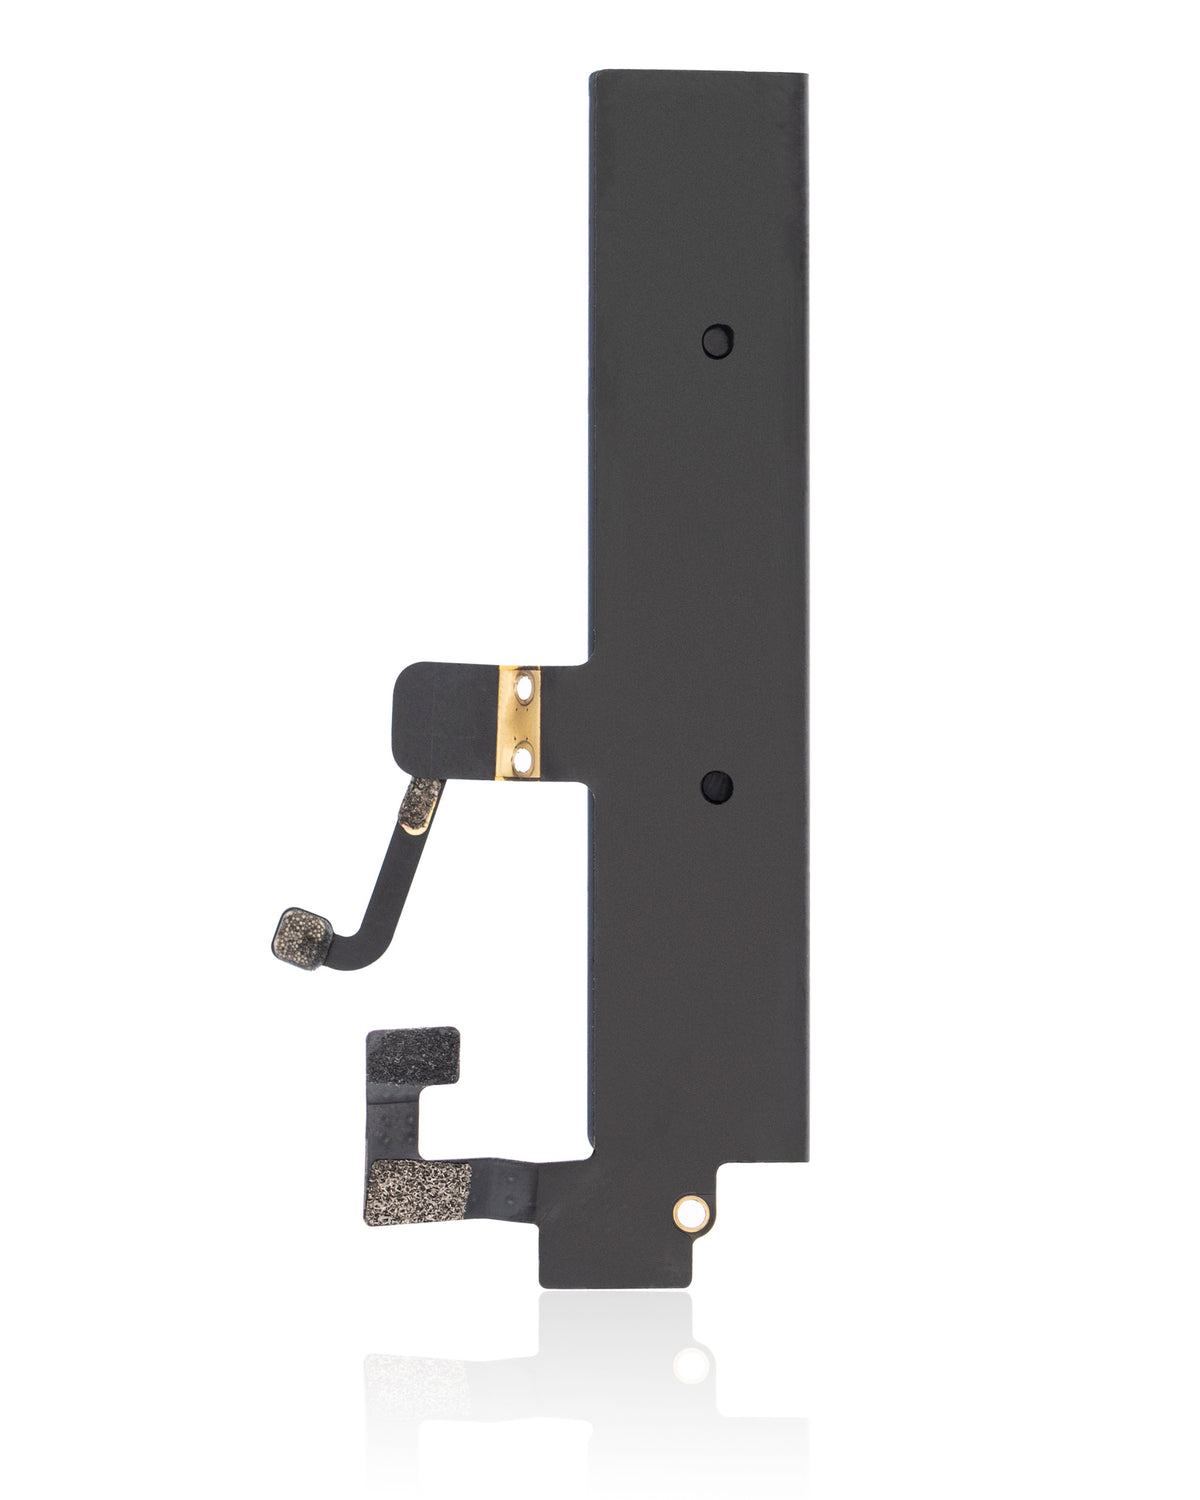 4G ANTENNA FLEX CABLE (RIGHT SIDE) COMPATIBLE WITH IPAD AIR 2